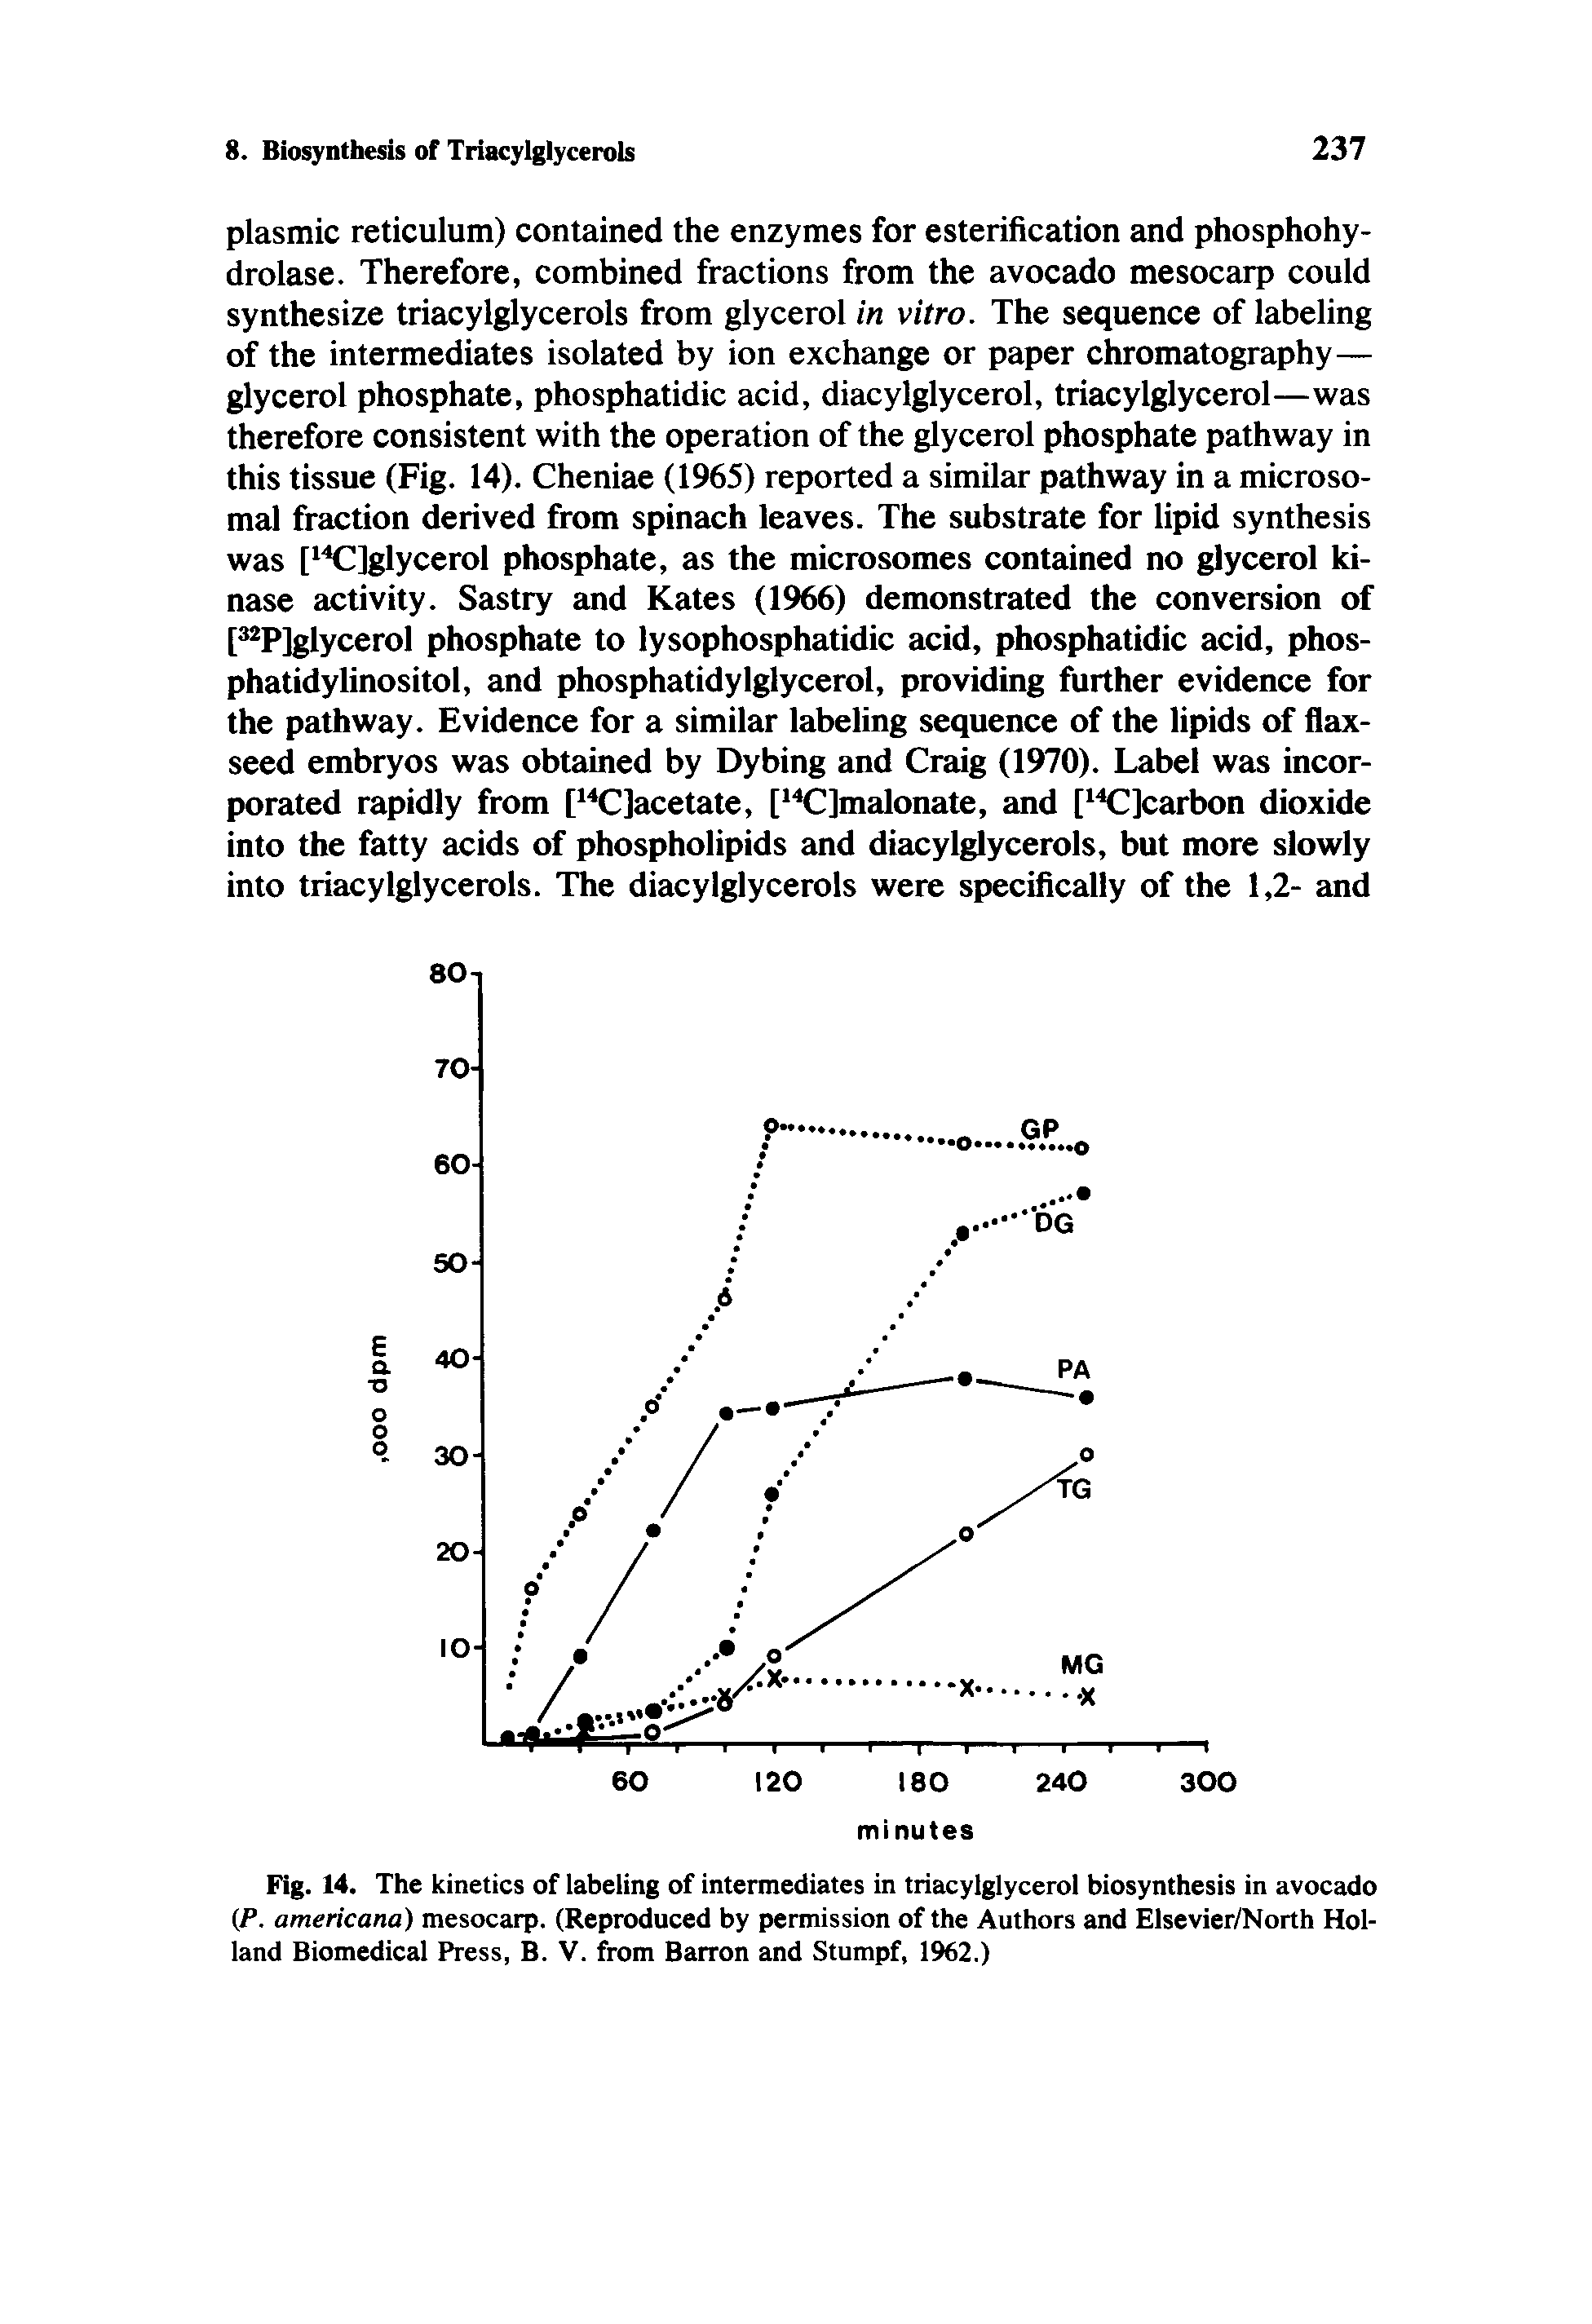 Fig. 14. The kinetics of labeling of intermediates in triacylglycerol biosynthesis in avocado (P. americana) mesocarp. (Reproduced by permission of the Authors and Elsevier/North Holland Biomedical Press, B. V. from Barron and Stumpf, 1962.)...